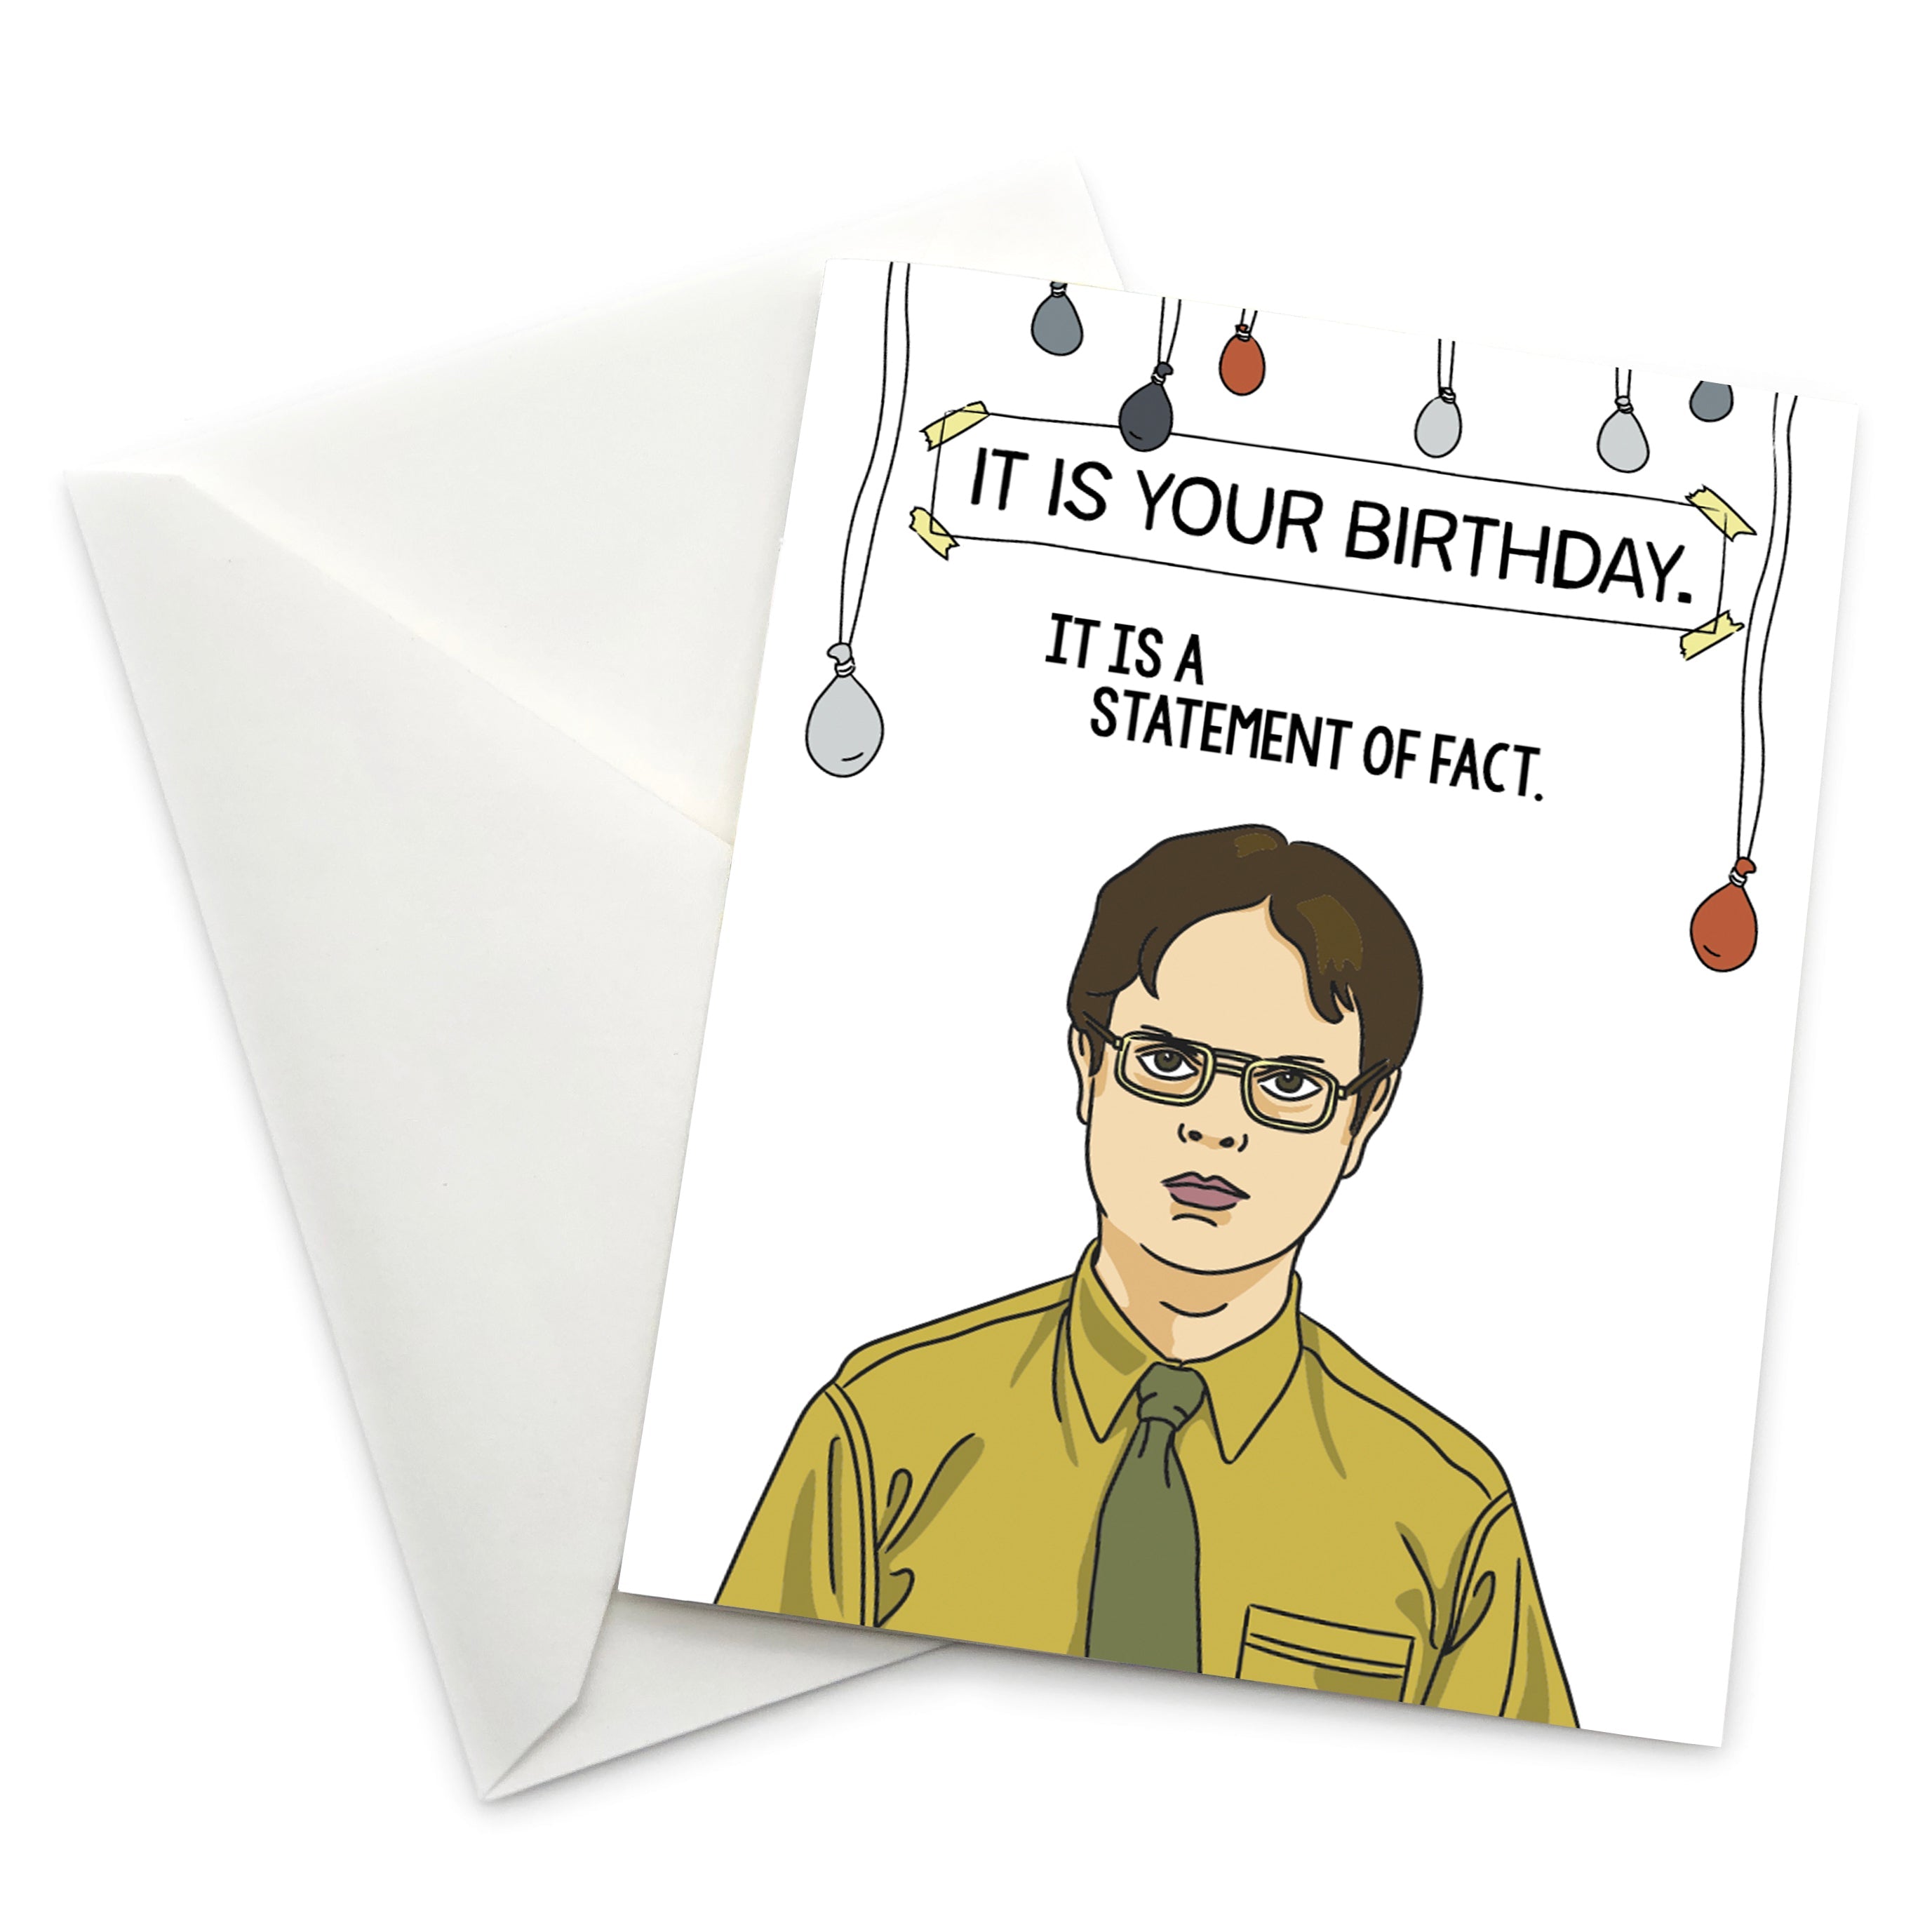 It's Your Birthday. It's a Statement of Fact” Birthday Card - Officia –  Papersalt